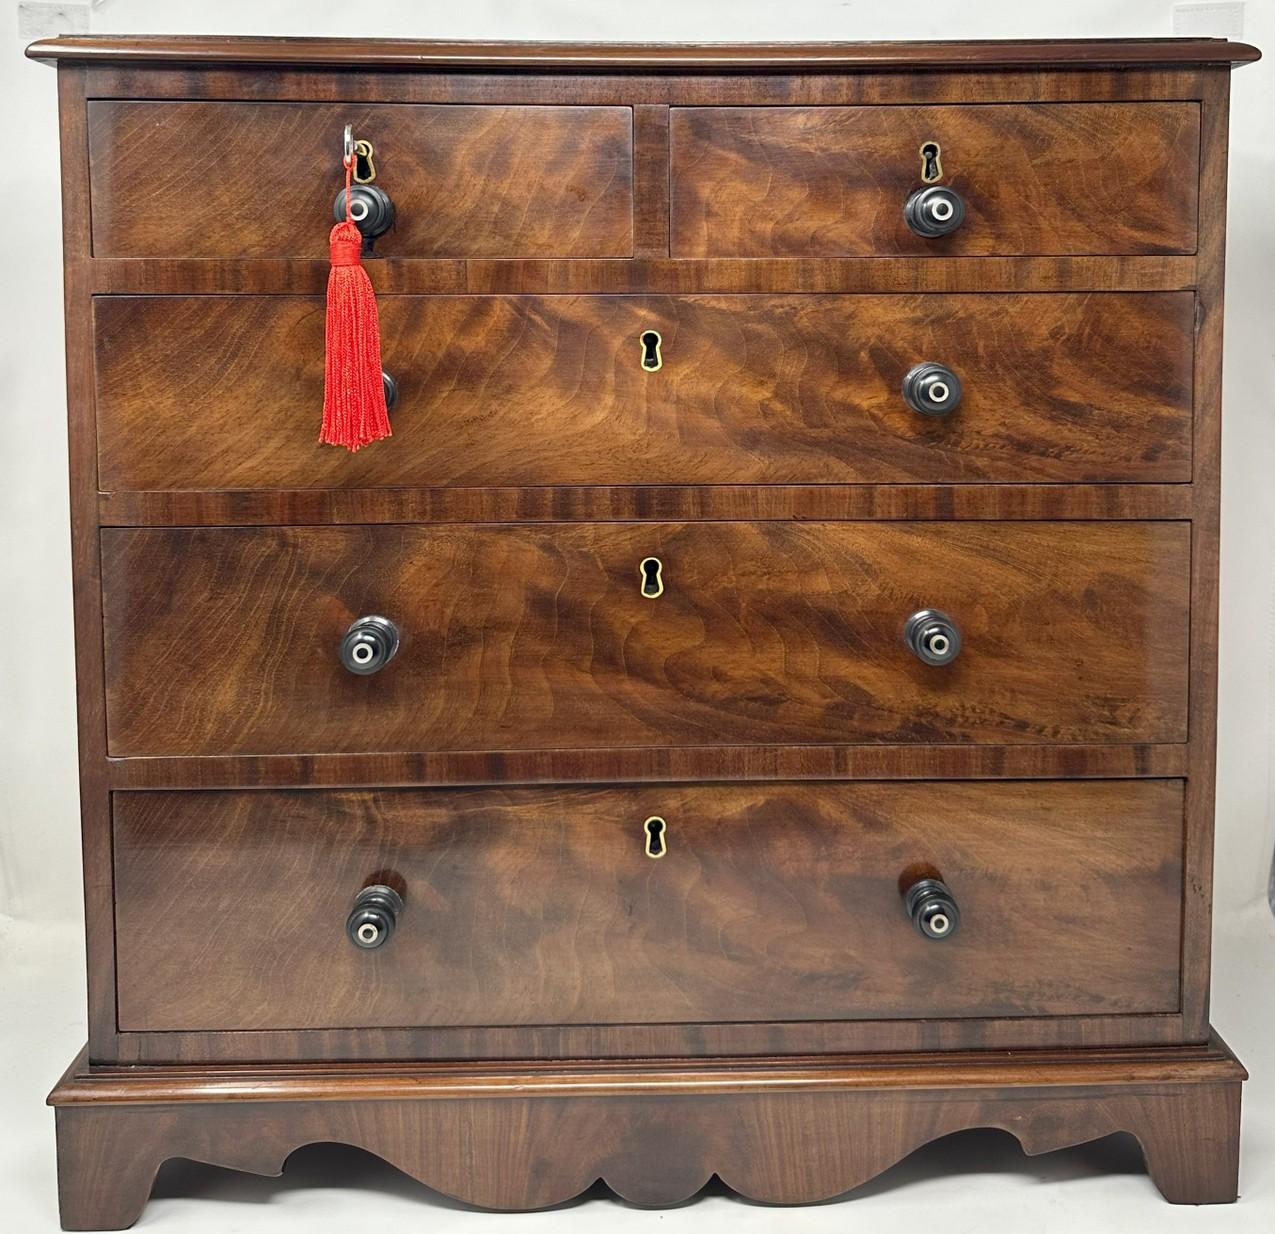 Antique English Regency Miniature Apprentice Chest Drawers Flame Mahogany 19Ct   In Good Condition For Sale In Dublin, Ireland